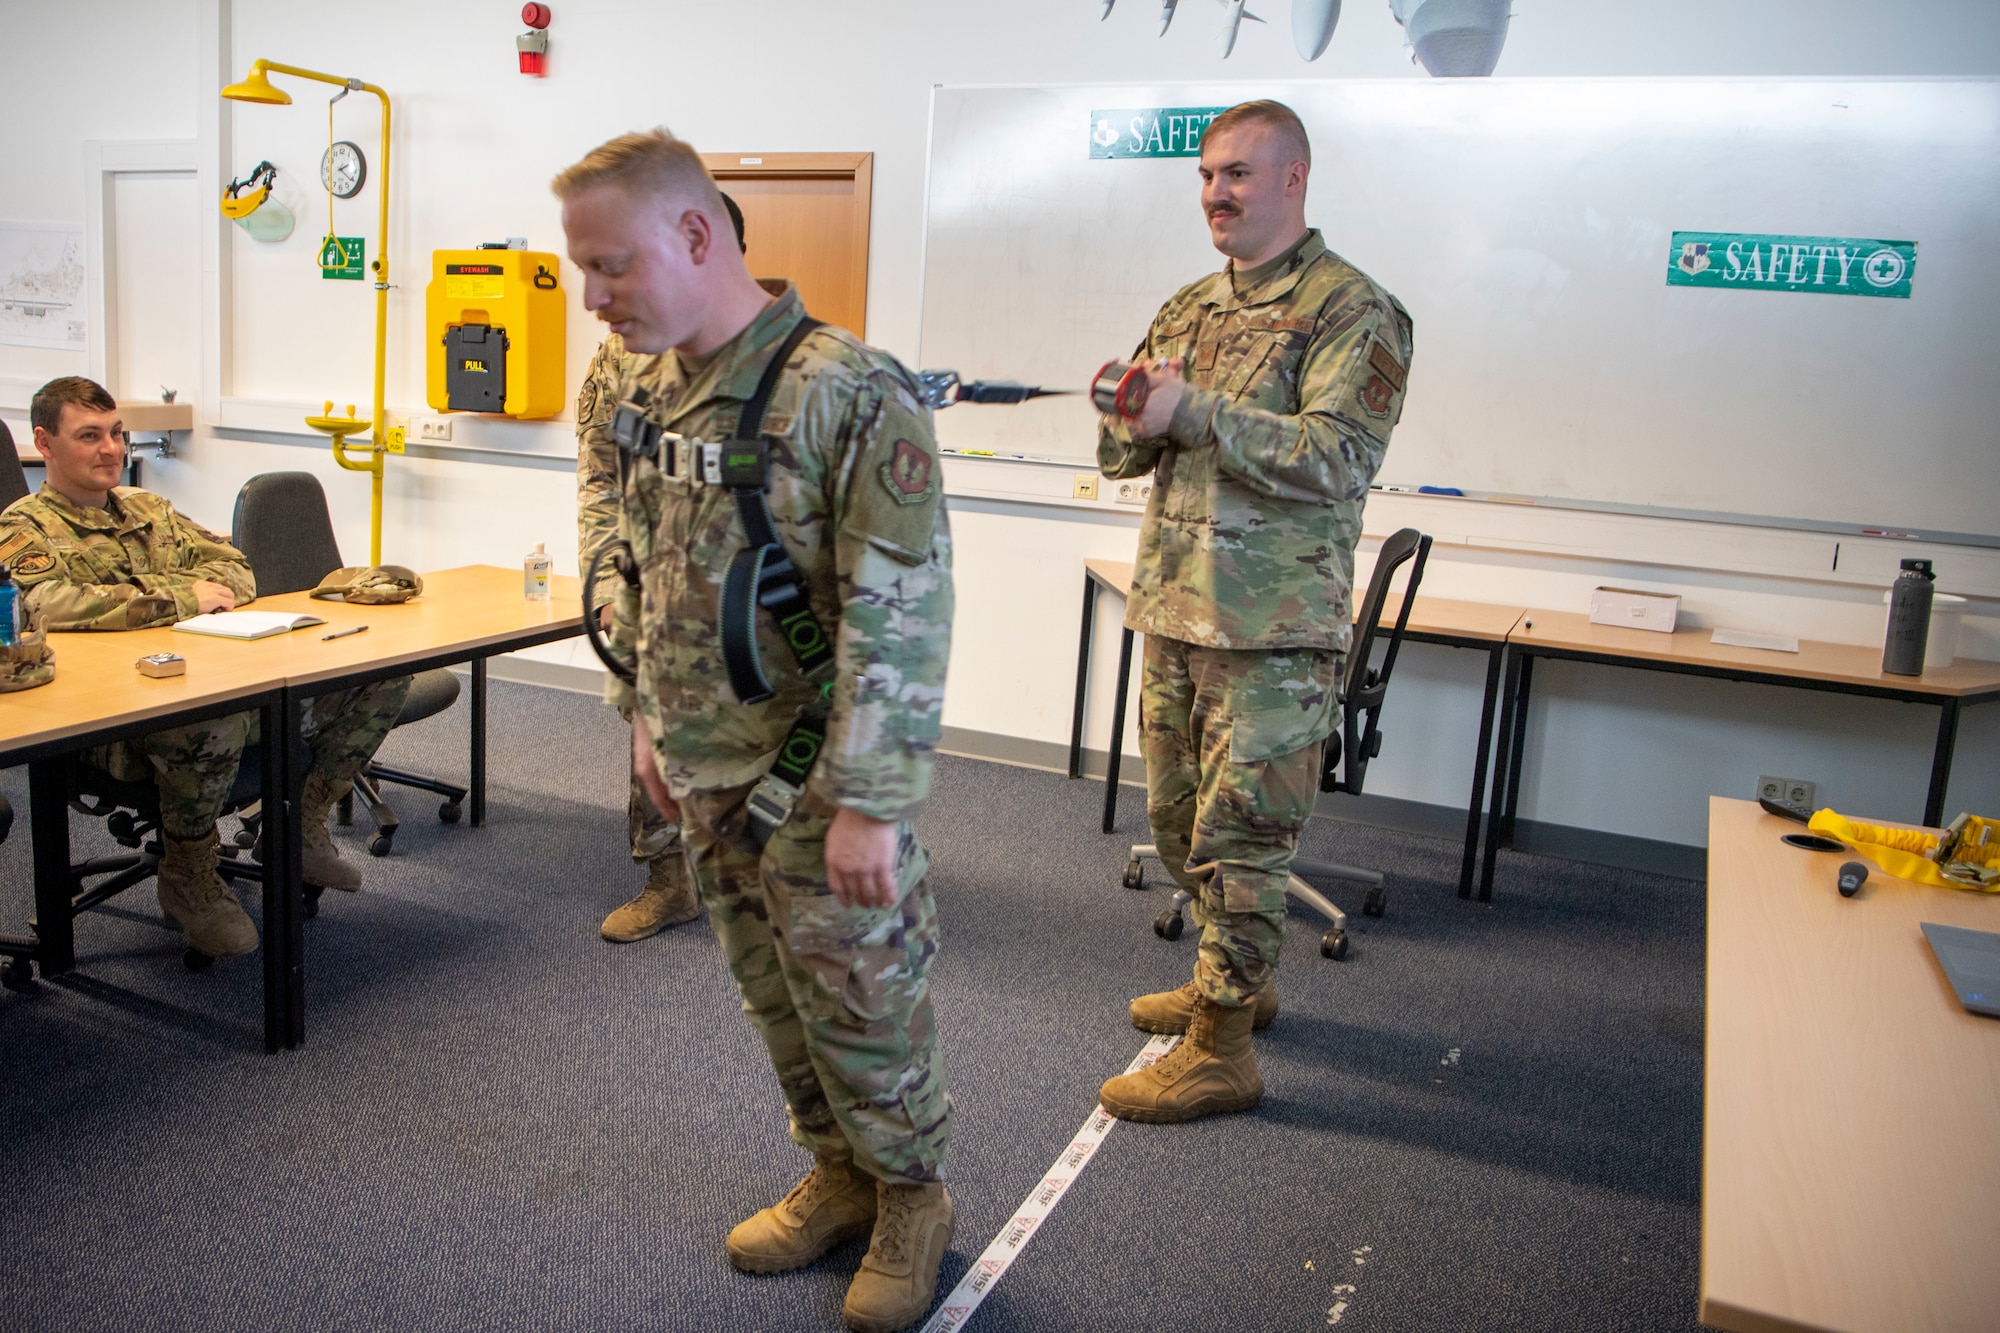 Staff Sgt. Jacob Bass, right, 52nd Fighter Wing Safety occupational safety technician, and Tech Sgt. Josiah Sorrels, 52nd Civil Engineer Squadron structural technician, demonstrate using a shock absorbing lanyard, May 3, 2022, on Spangdahlem Air Base, Germany. The 52nd FW Safety office hosted a Fall Protection Training Course to teach the importance and proper use of fall protection equipment. (U.S. Air Force photo by Airman 1st Class Jessica Sanchez-Chen)